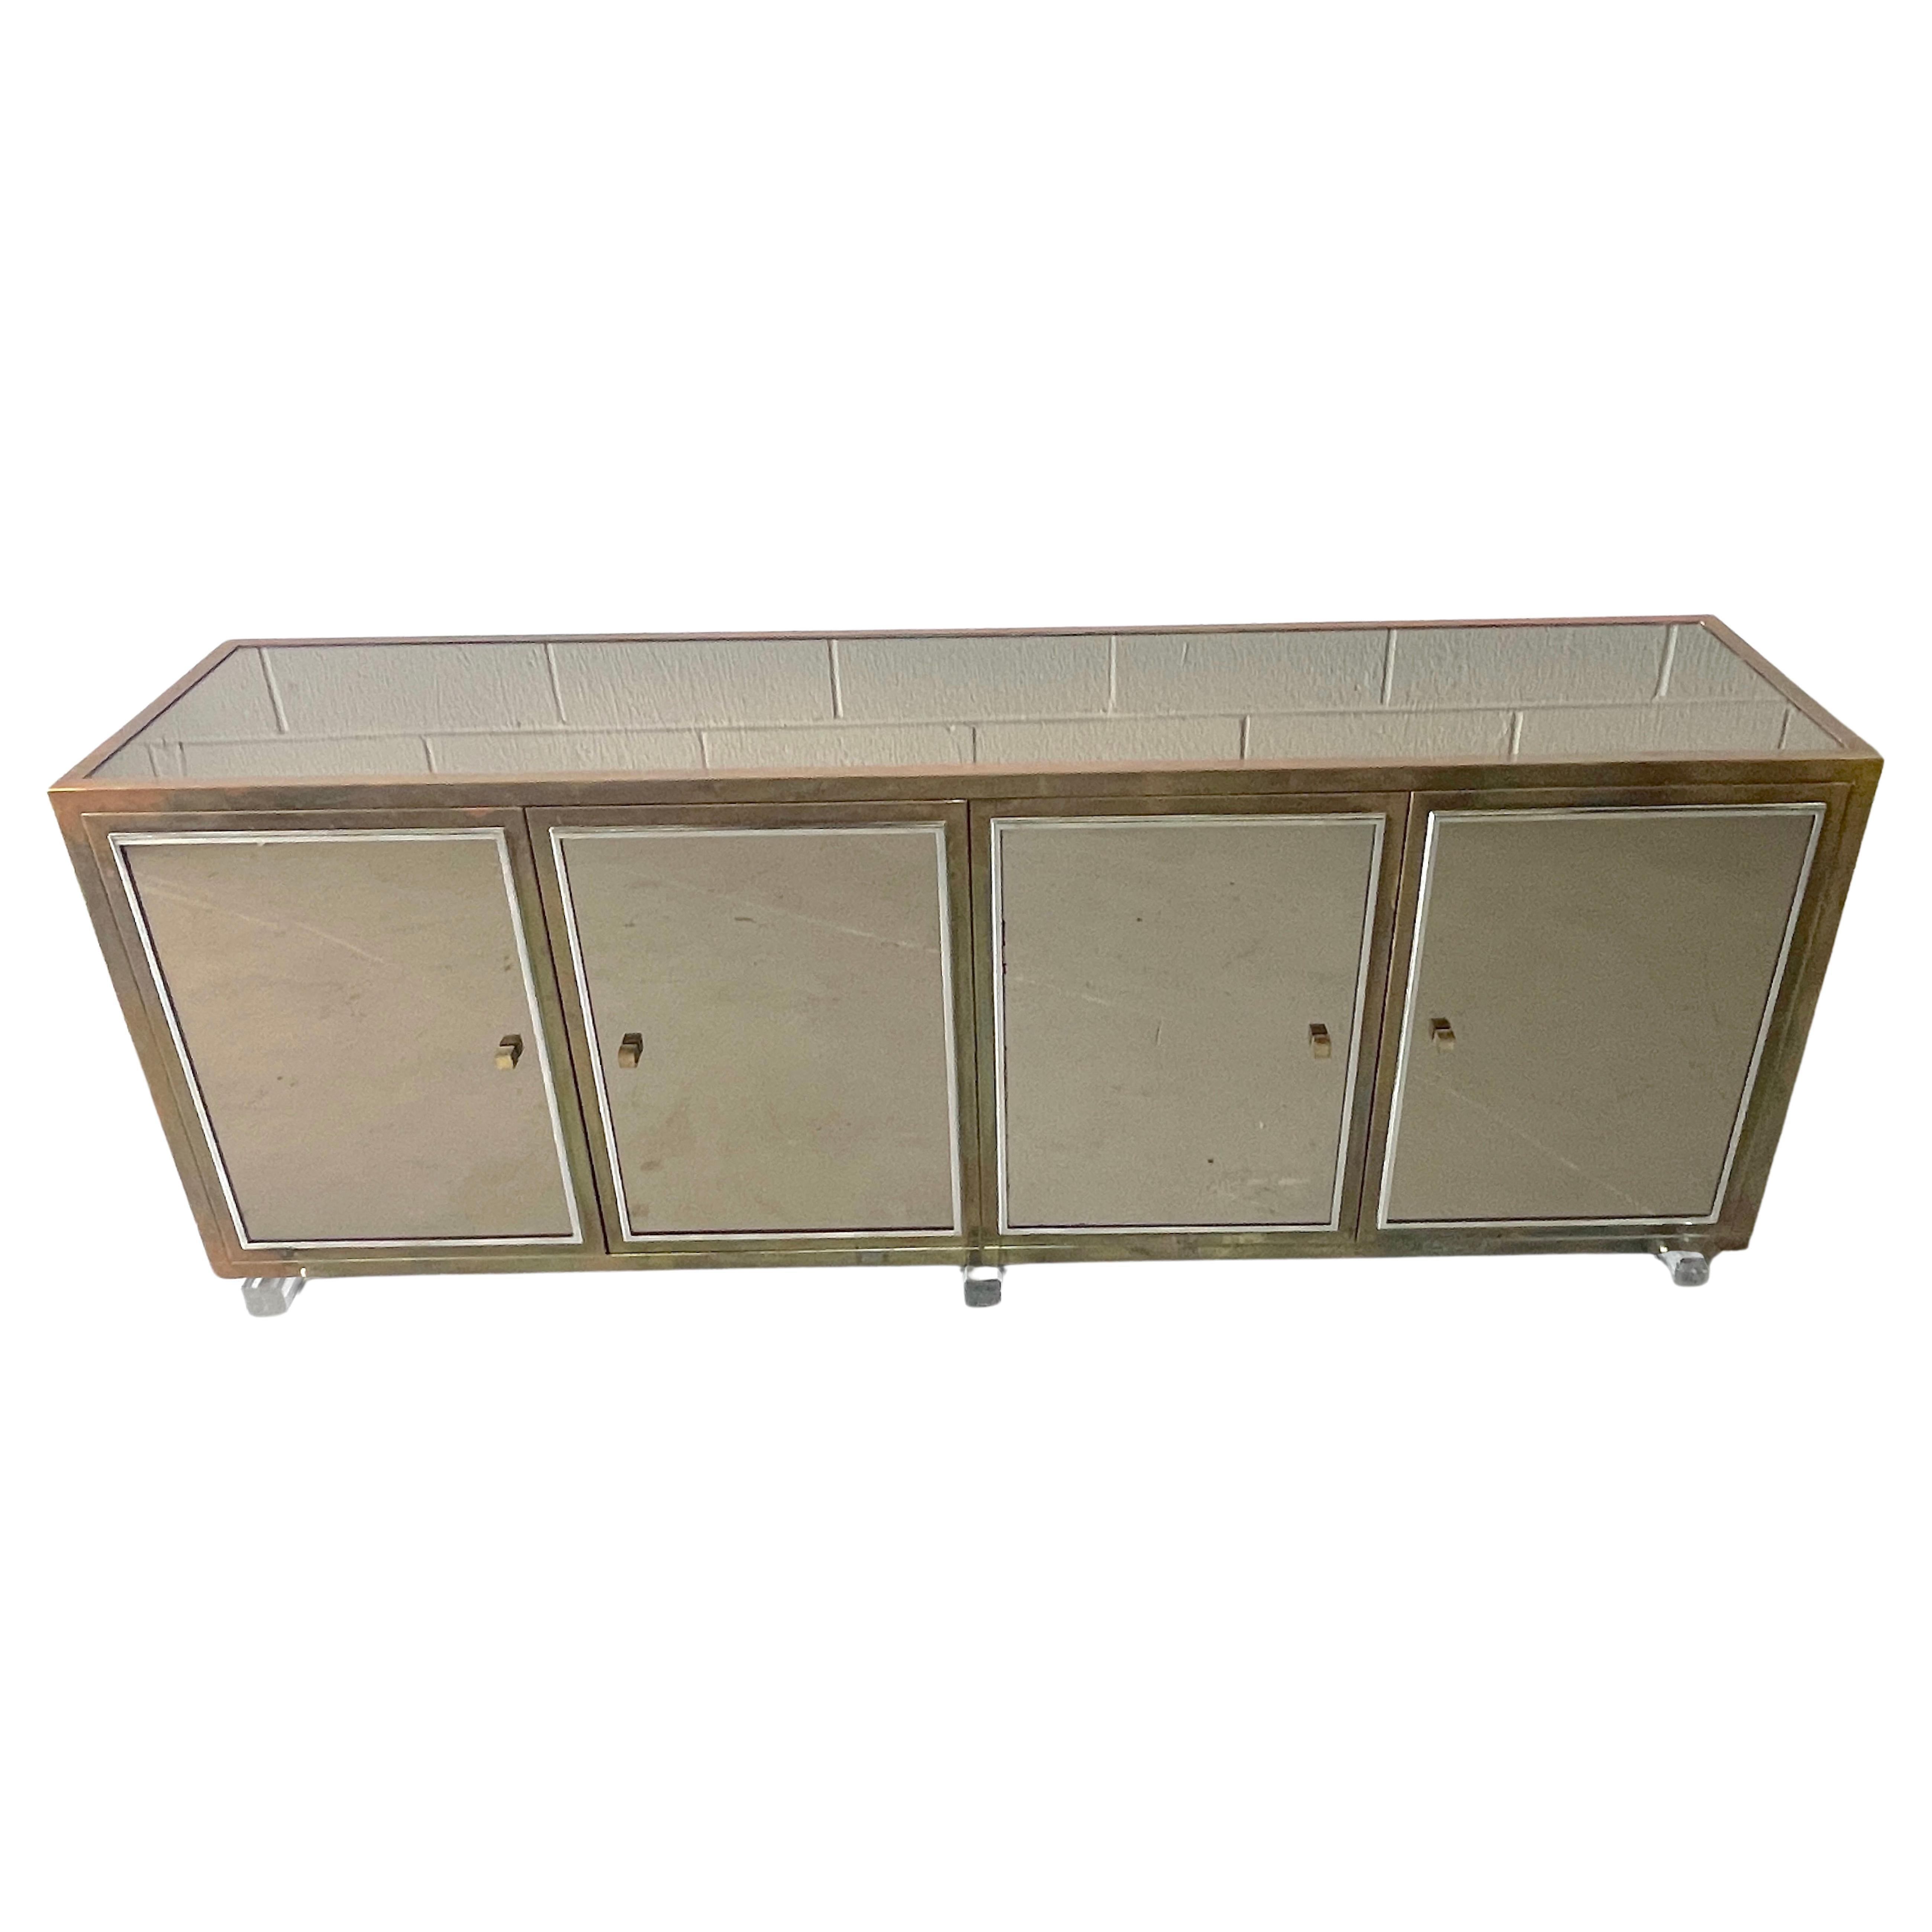 Large French Modern Mirrored Credenza/Sideboard by Michel Pigneres 
France, circa 1970s

A stunning large French modern mirrored credenza/sideboard designed by the renowned Michel Pigneres, made circa 1970s in France. This piece stands as a